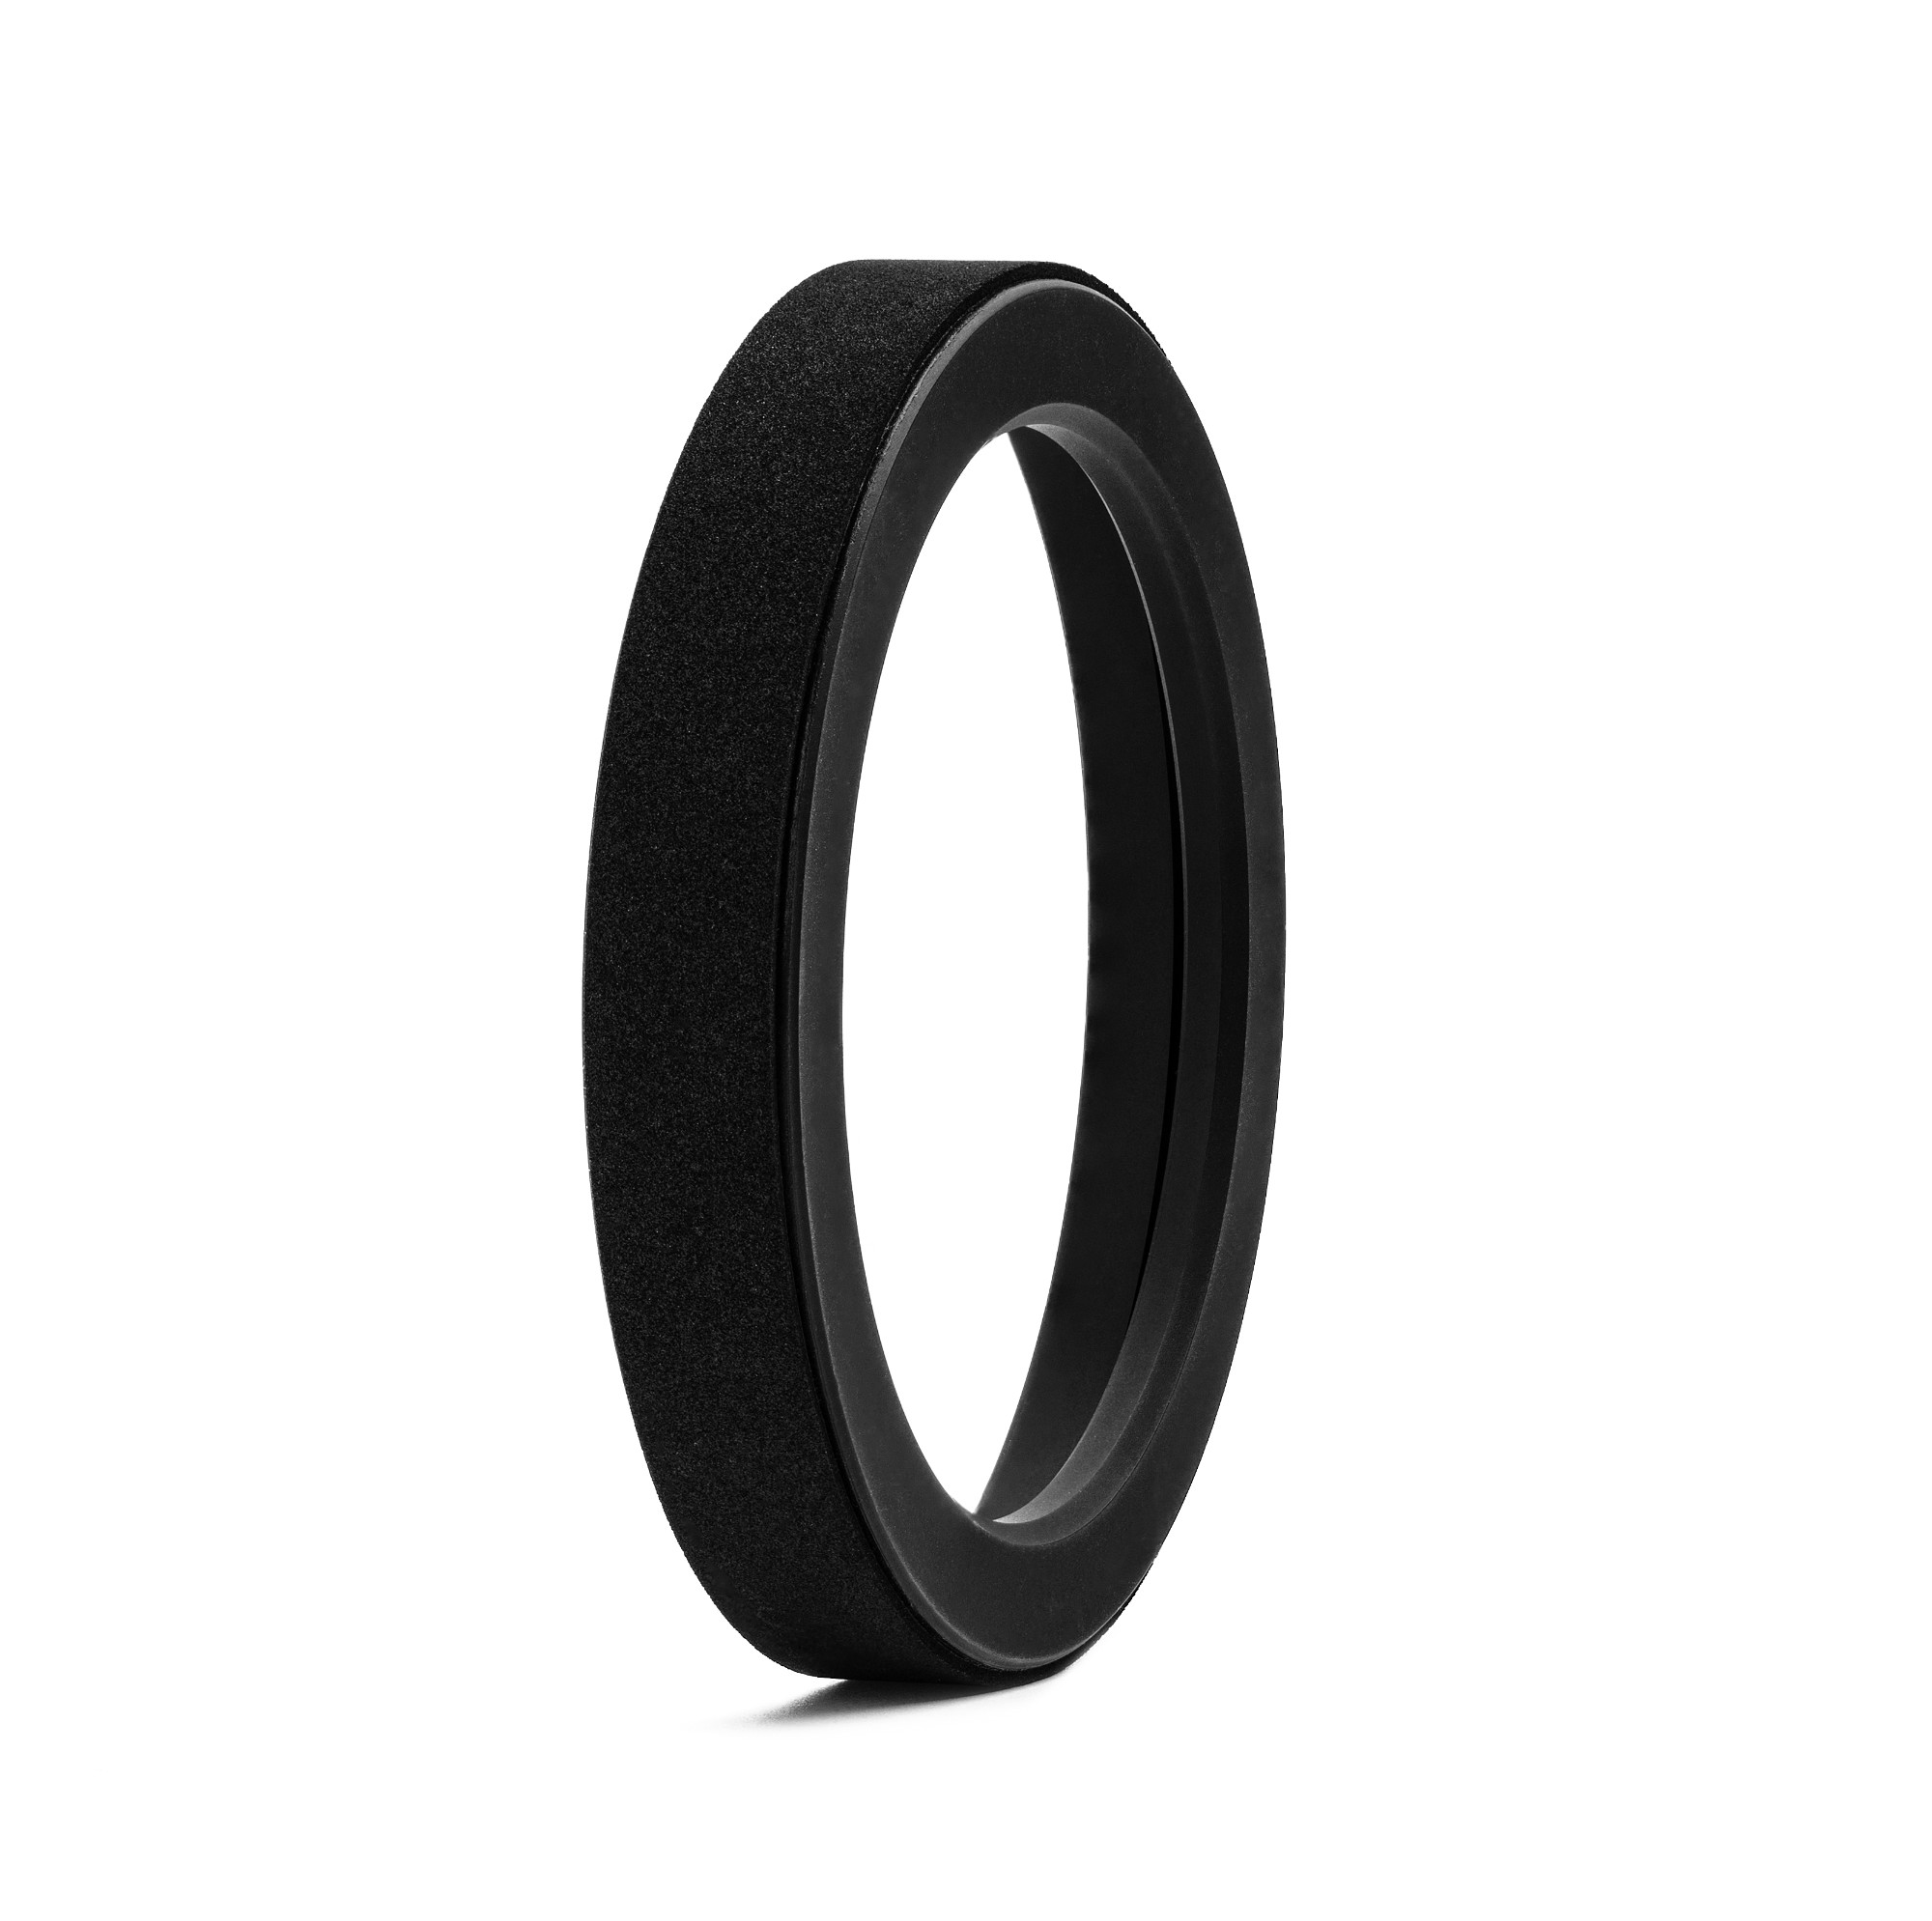 NiSi 82mm Filter Adapter Ring for S5/S6 (Sigma 14-24mm f/2.8 DG